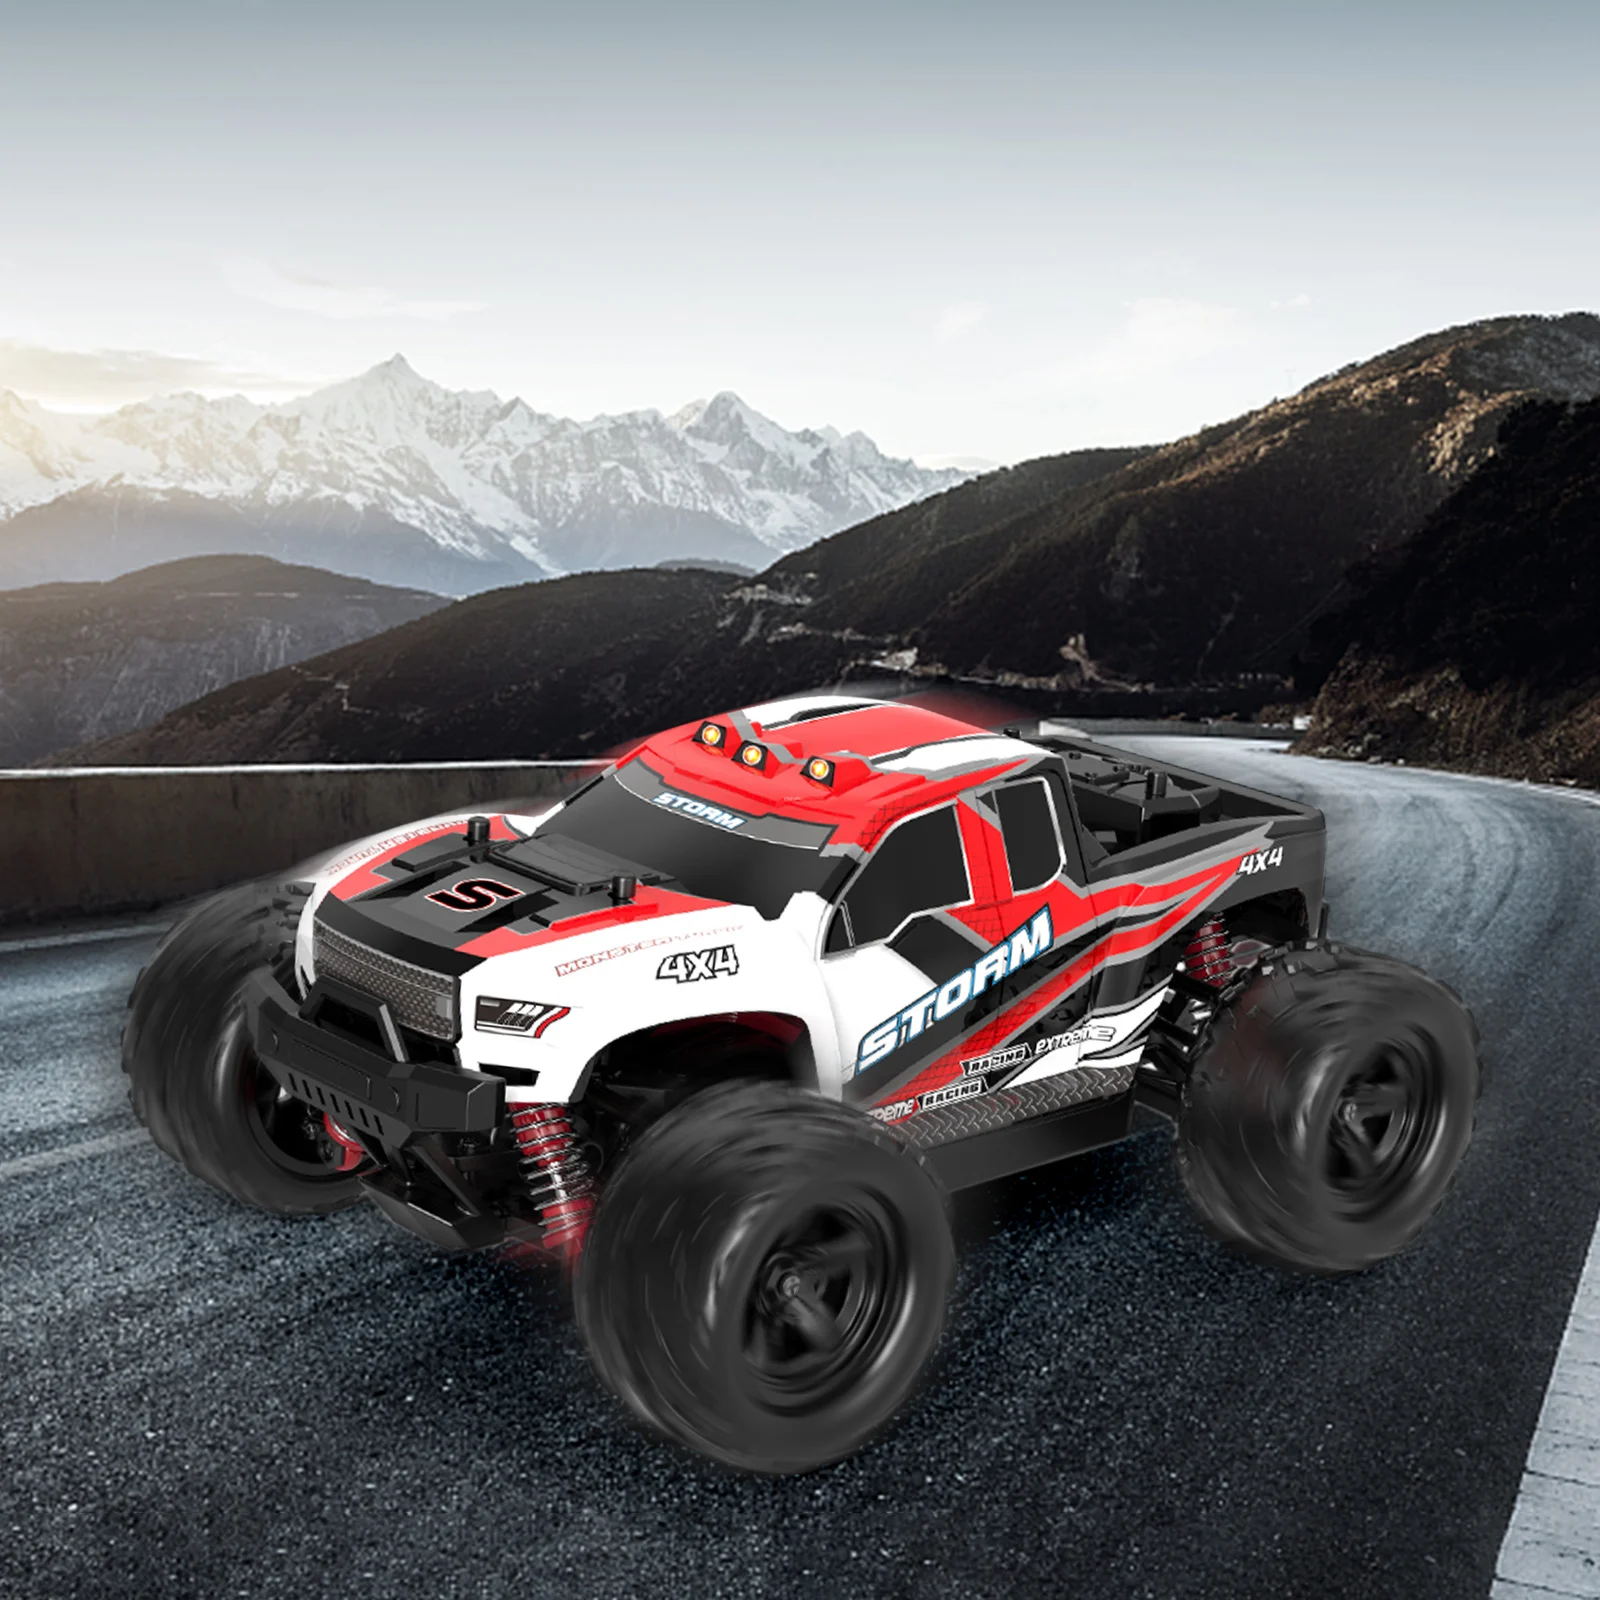 

4WD 2.4GHz High Speed 30km/h RC Cars 1/18 Remote Control Offroad Monster Trucks Holiday Party Gift for Kid Children